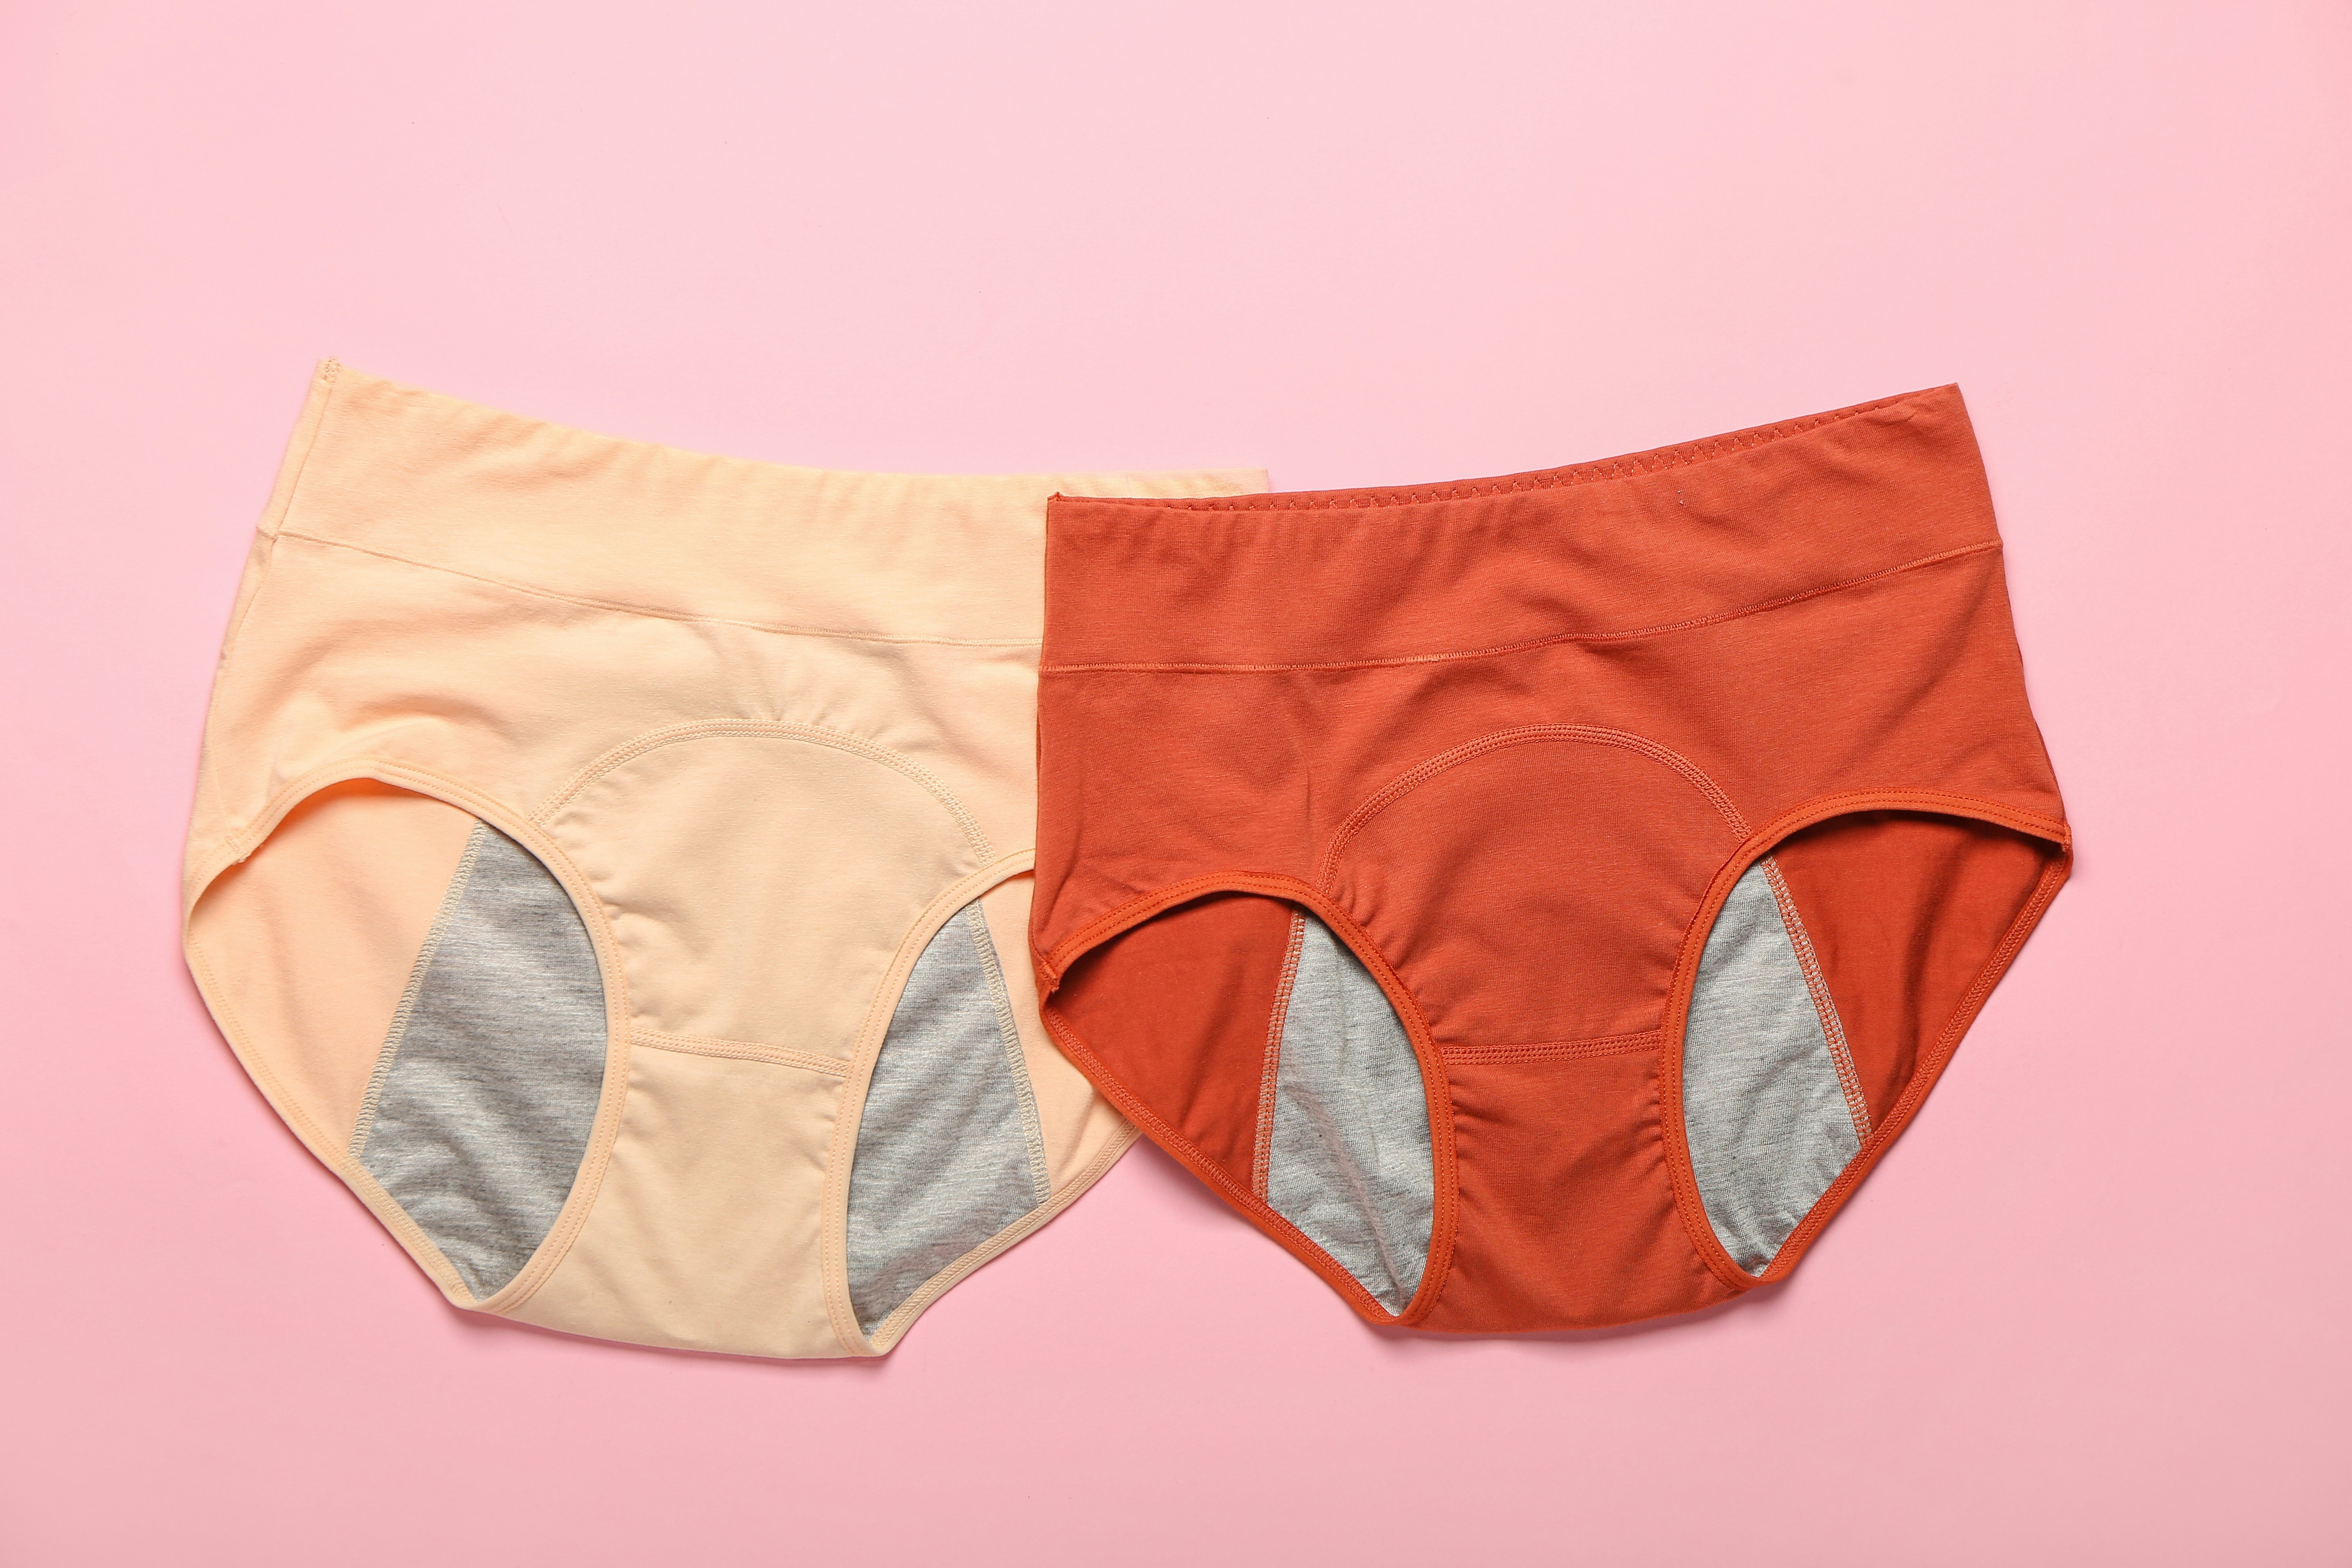 Wait, Period Underwear Contain Toxic Chemicals? Experts Weigh In